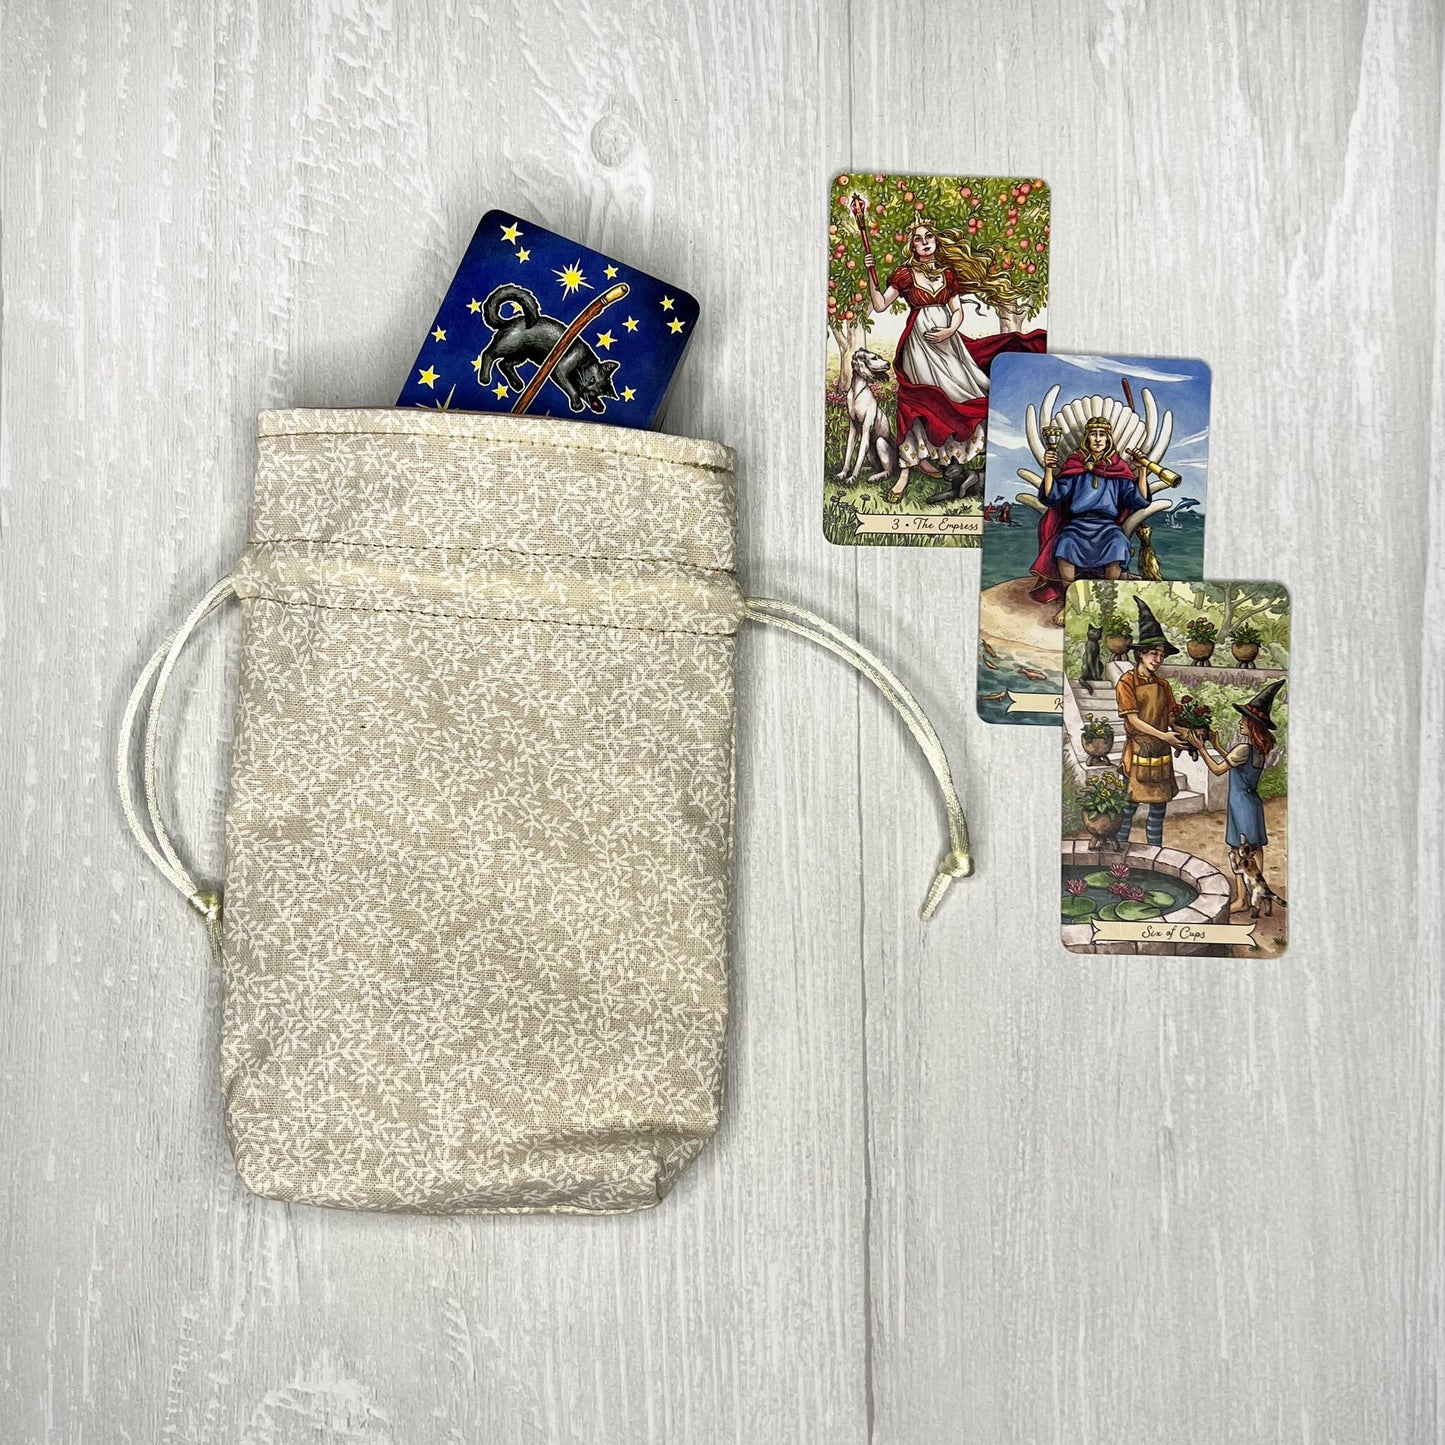 Floral Mini Tarot Deck Bag, Drawstring Pouch, Pocket Tarot, Dice Rune Crystal Bag, Witchcraft Wiccan & Pagan Supplies Gifts, Divination Tool